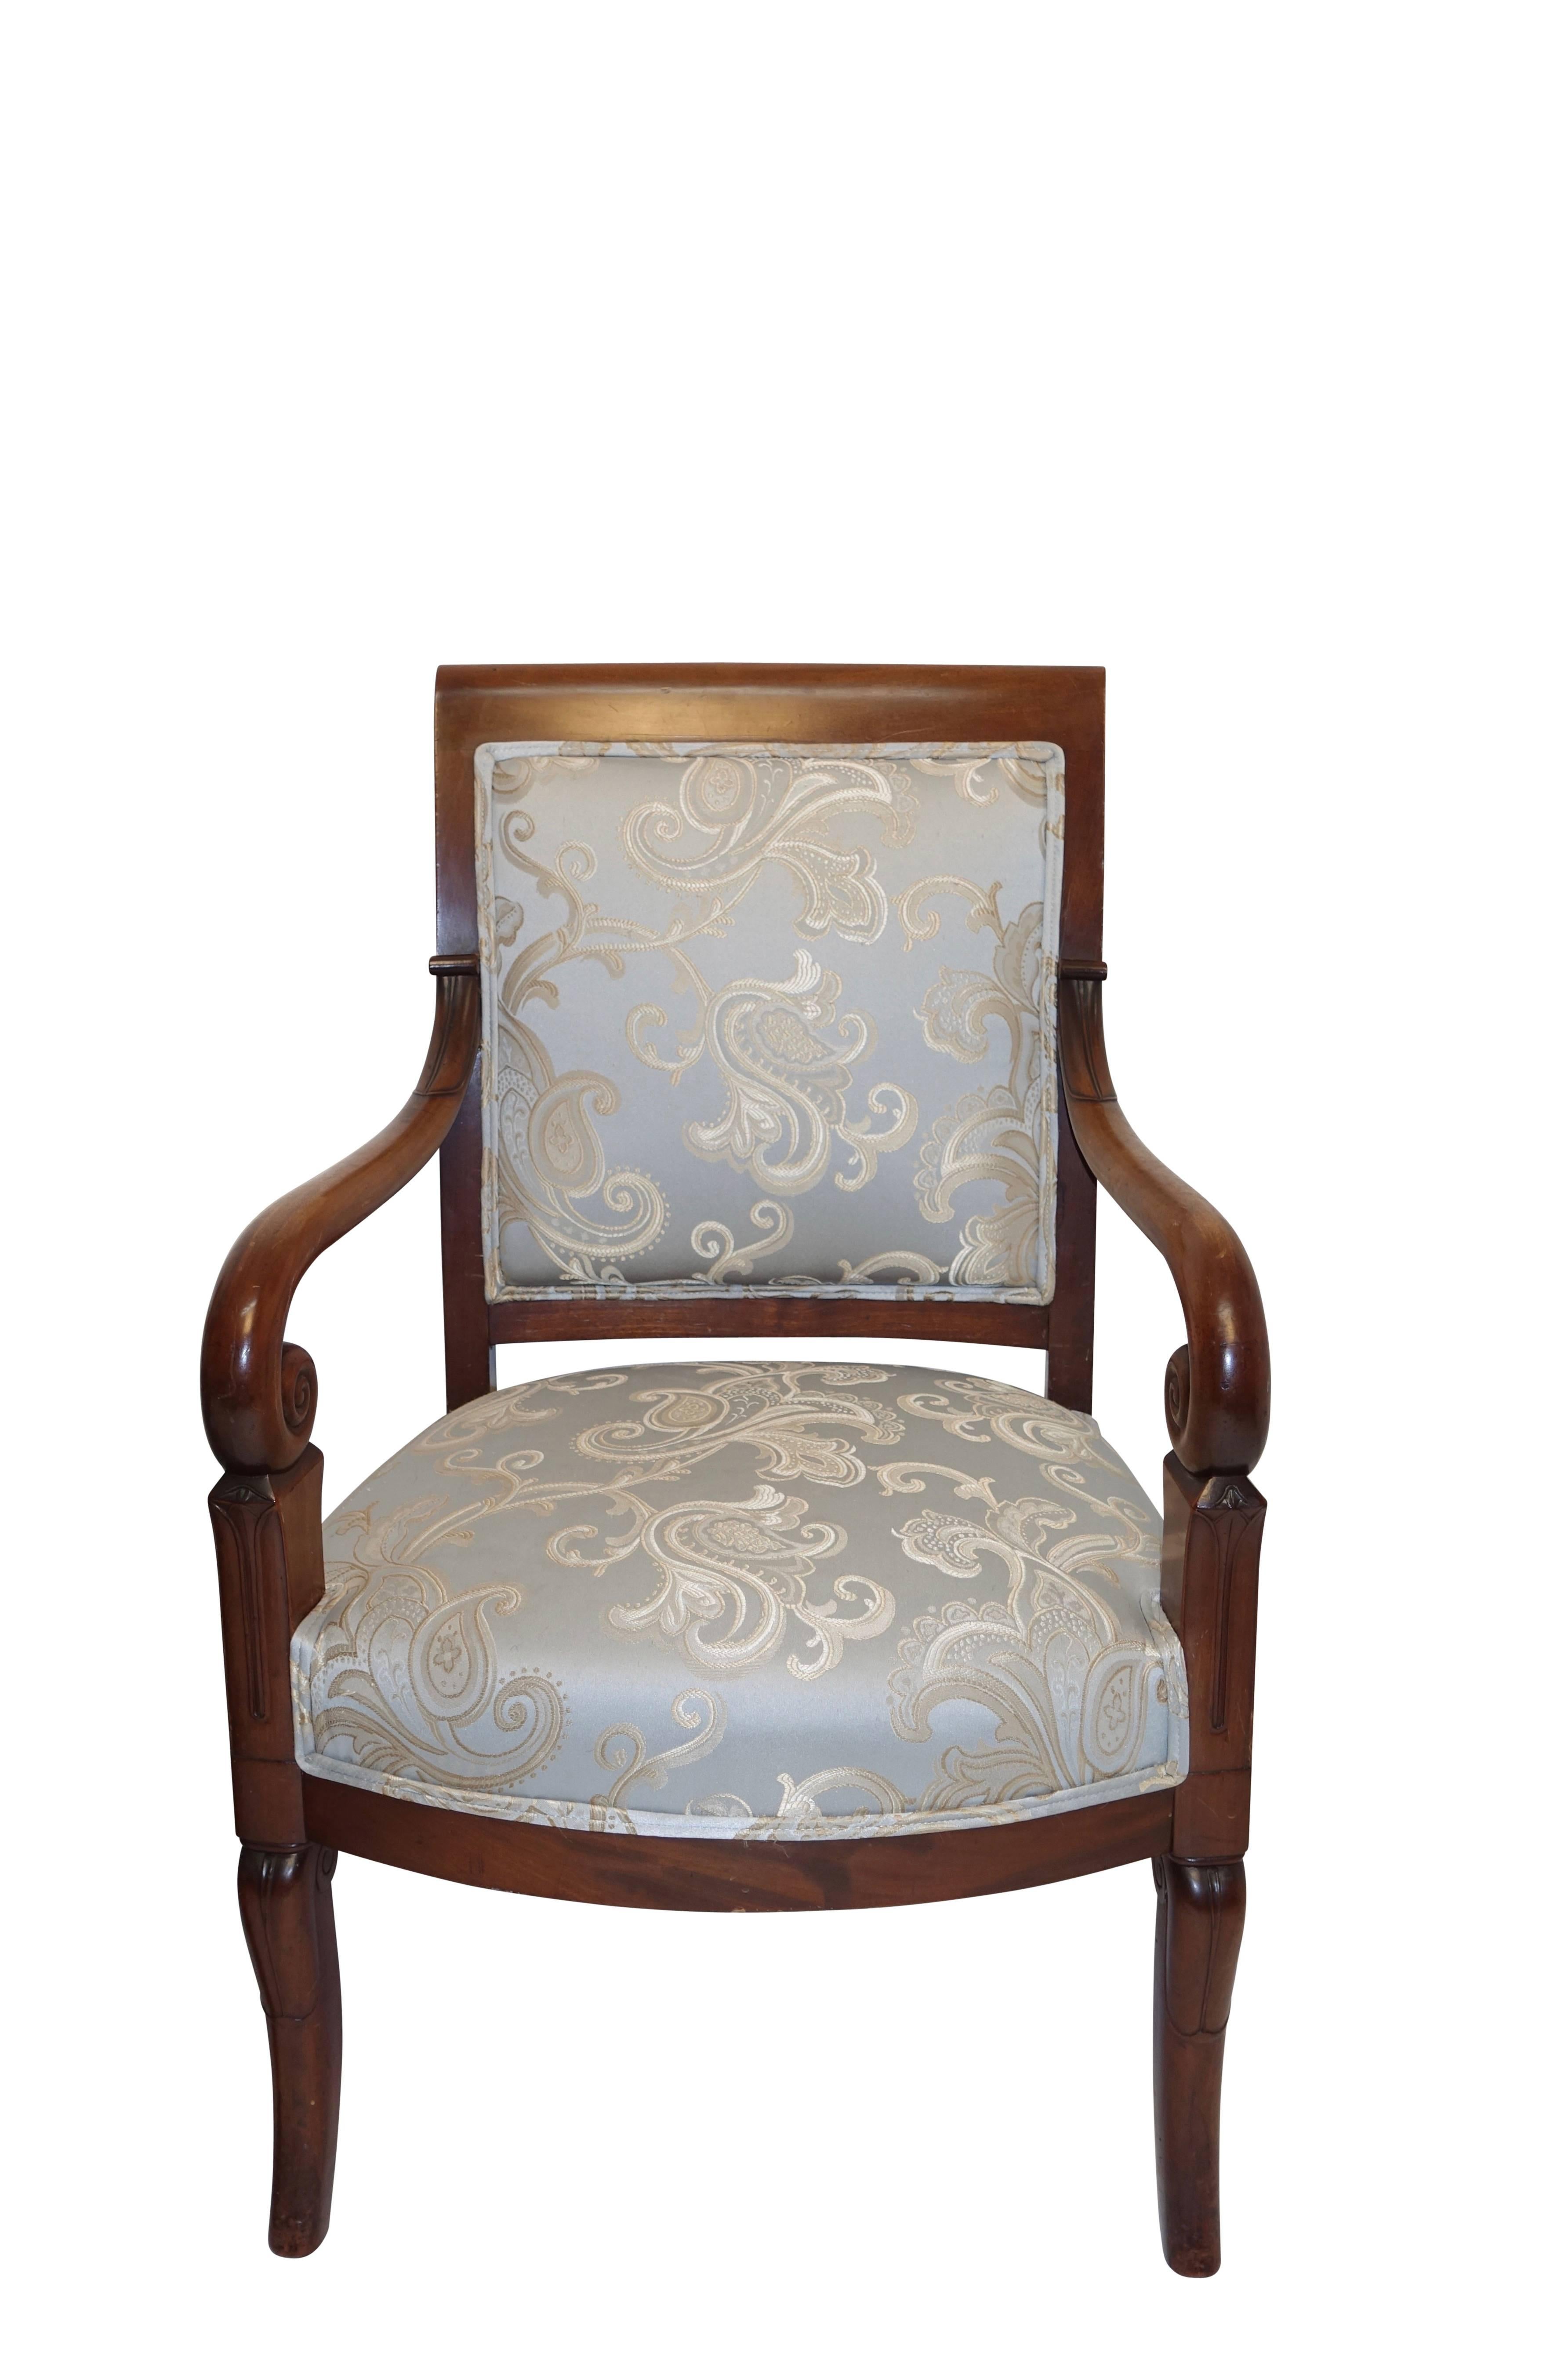 19th Century Pair of Charles X Walnut Fauteuils, French, circa 1830 For Sale